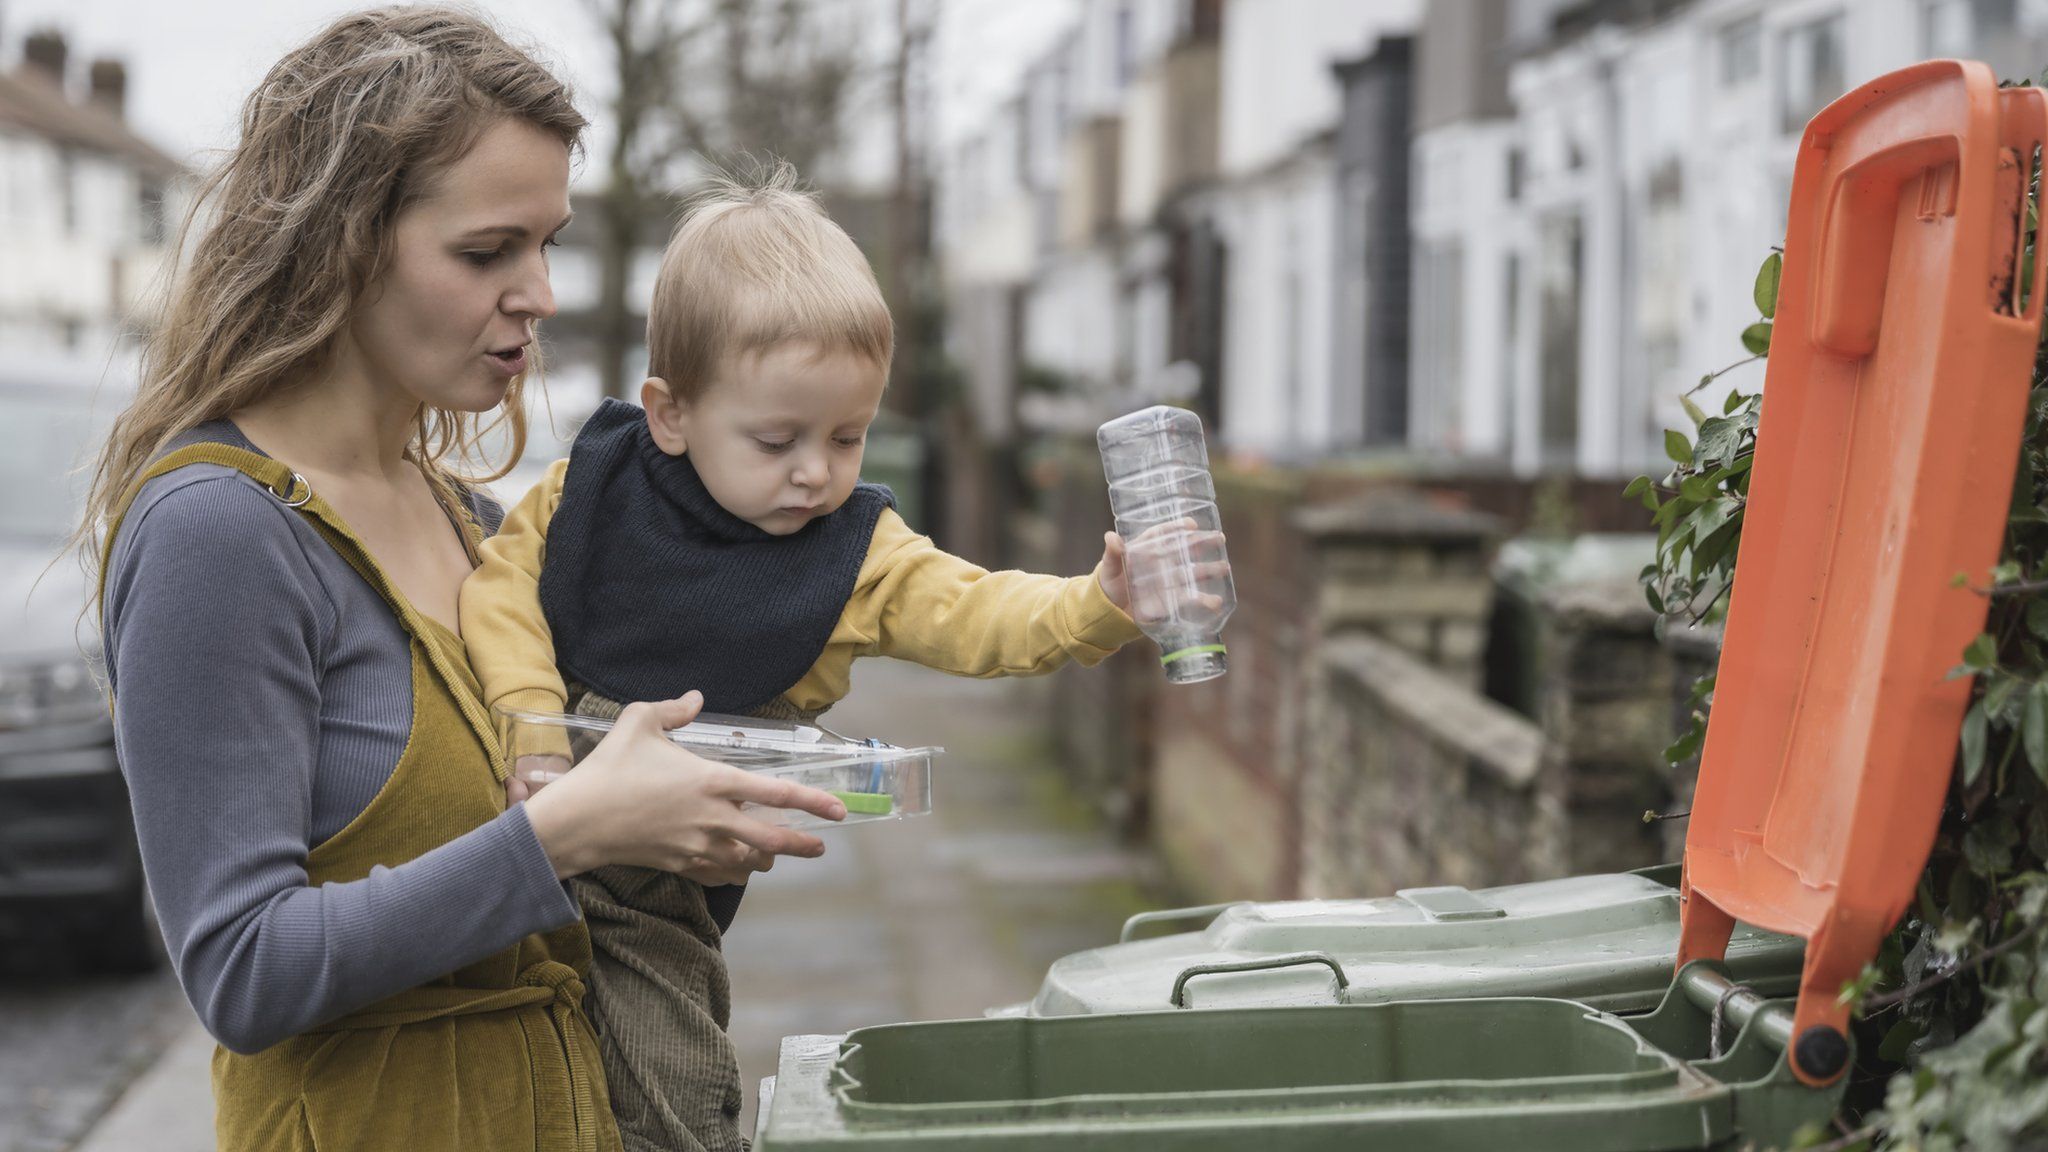 Woman and child putting recycling in a bin